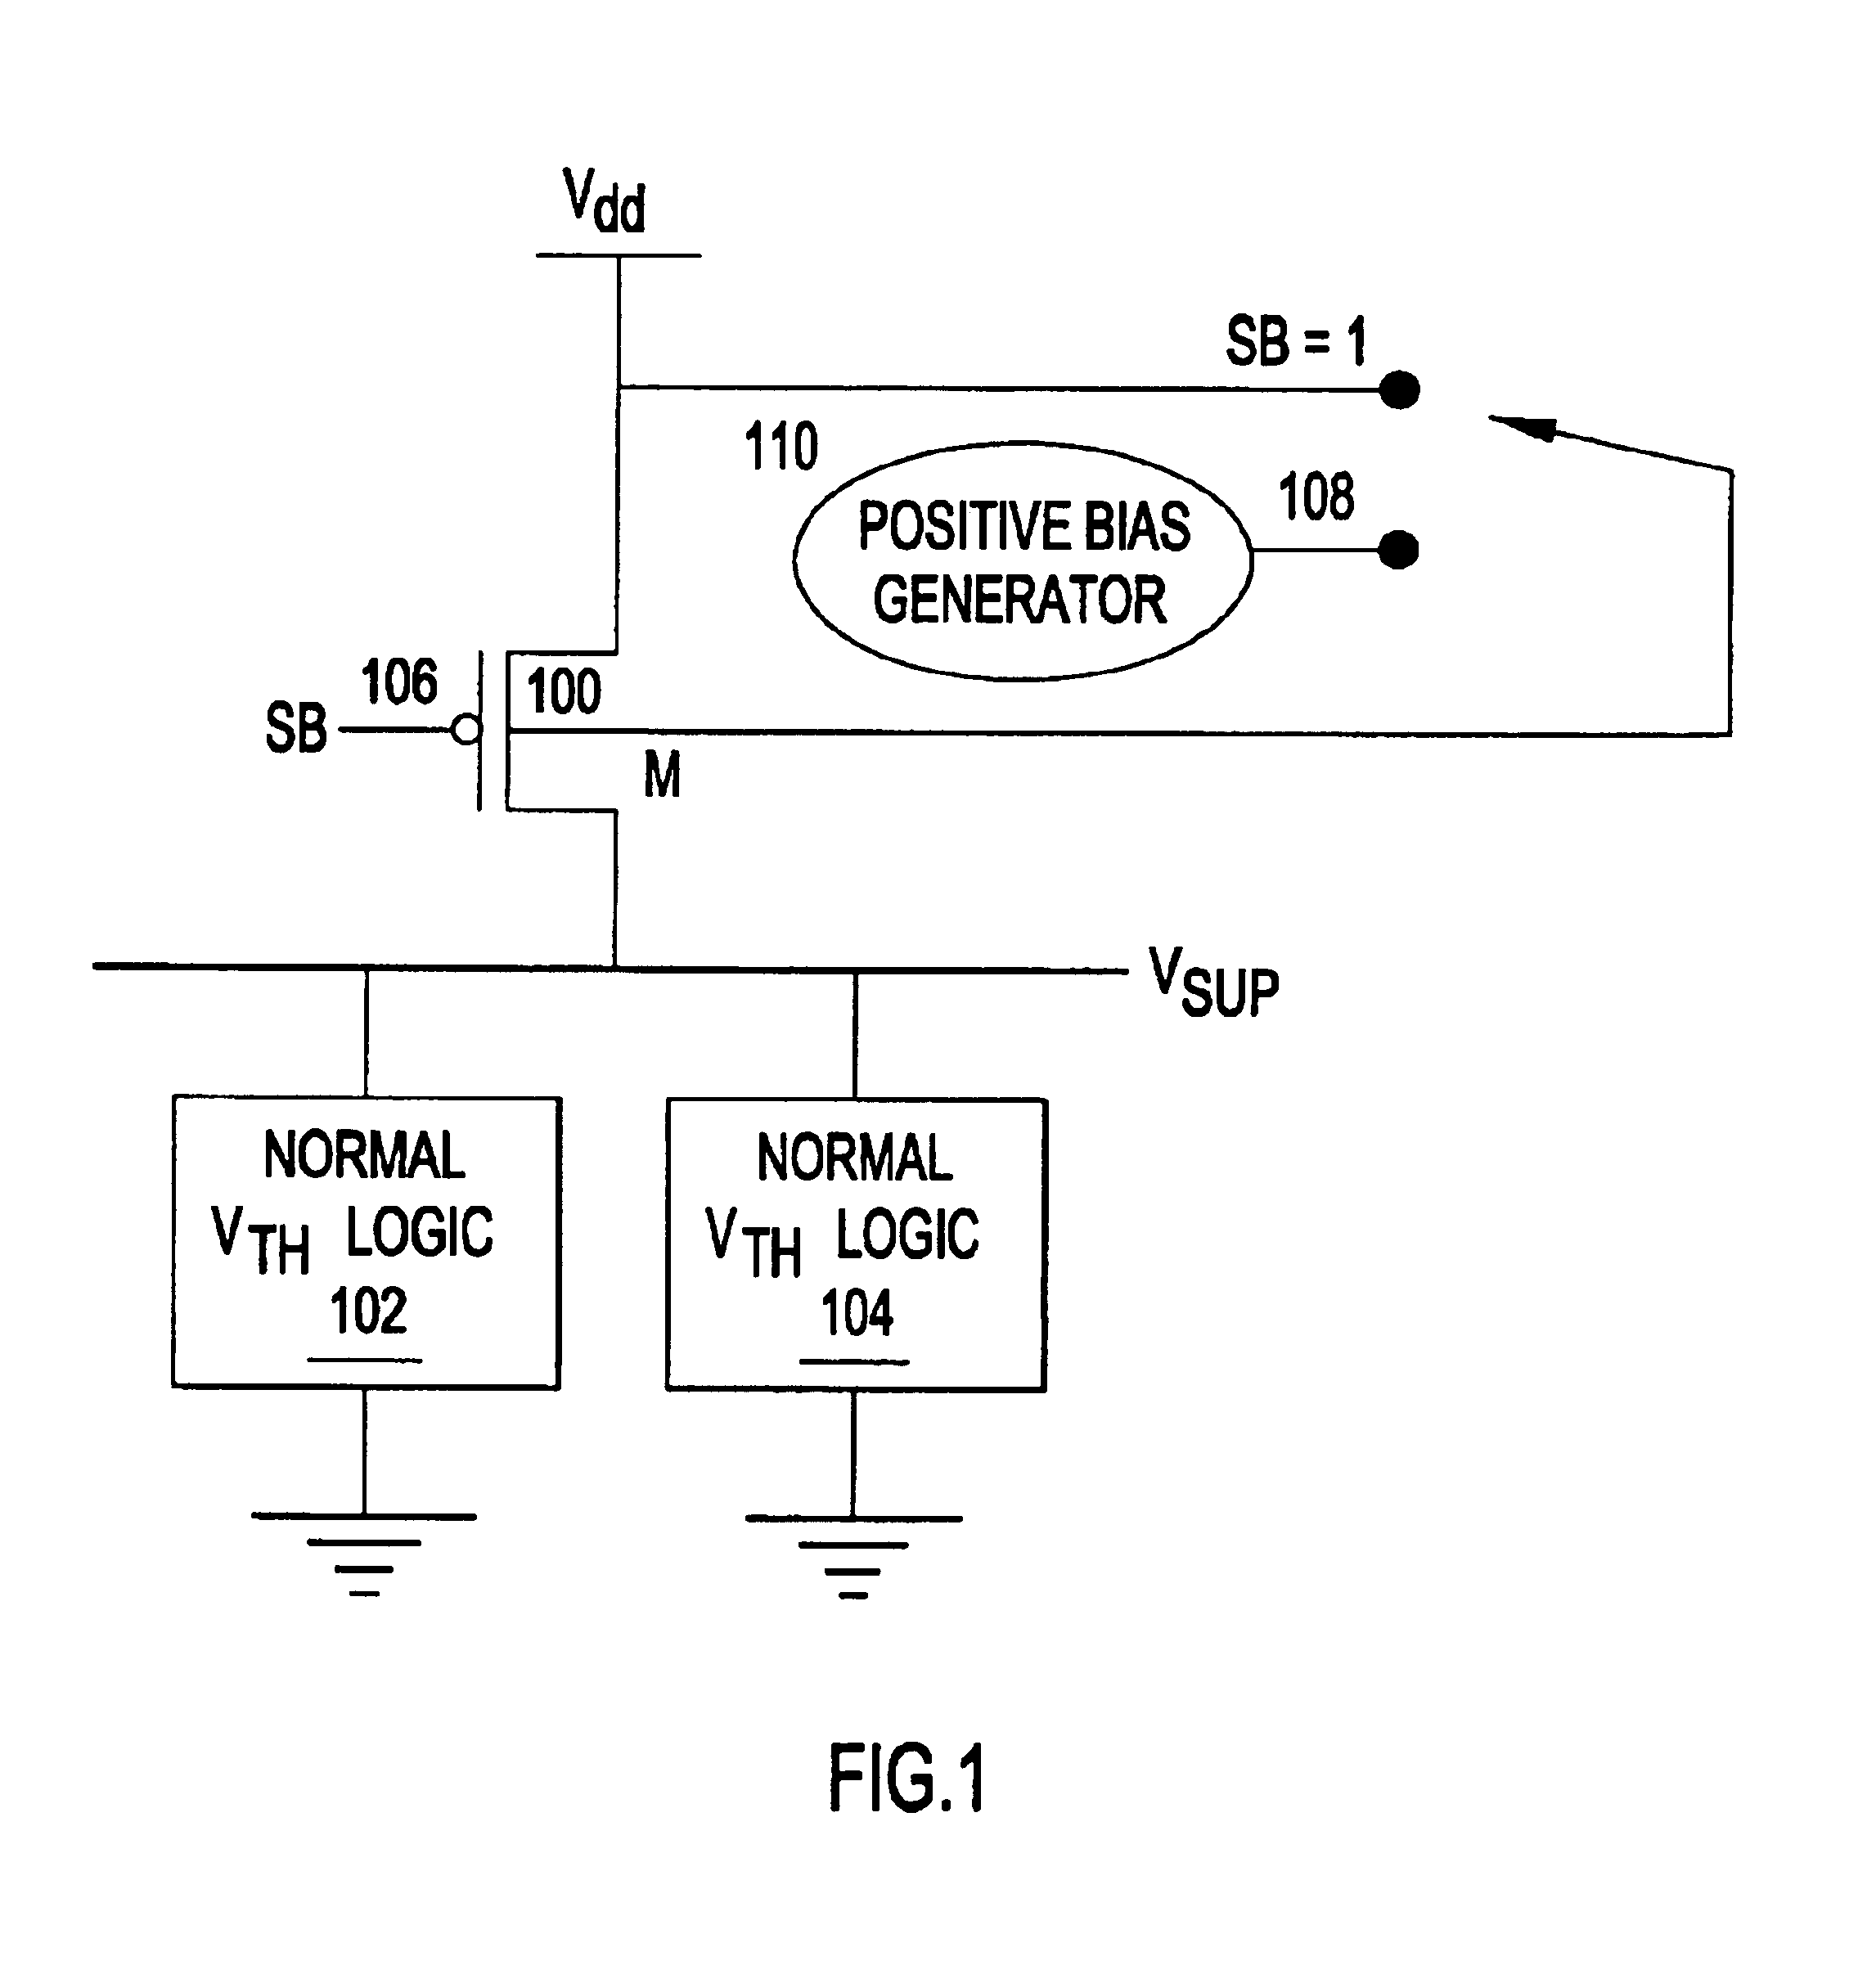 Method of reducing leakage current in sub one volt SOI circuits